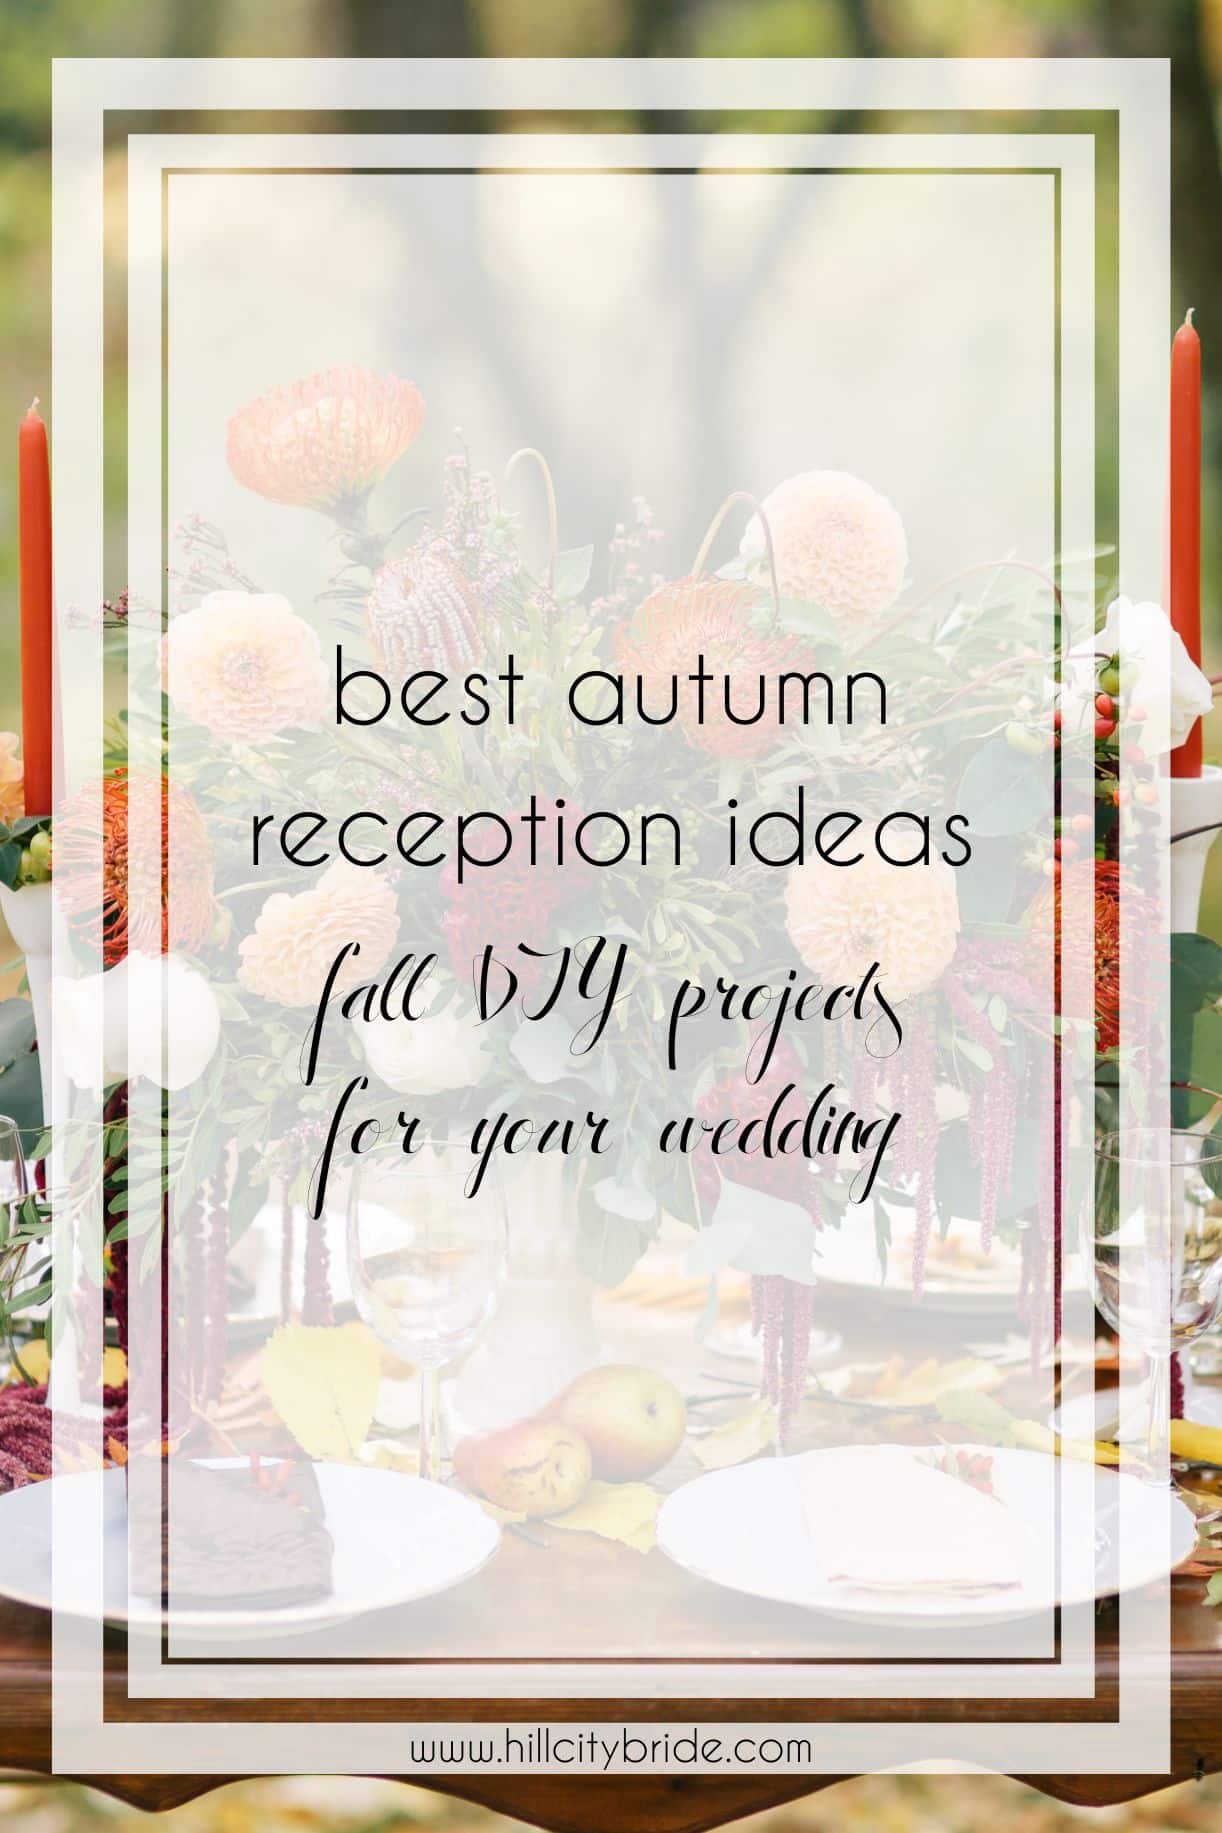  Best Fall Recipes and DIY Fall Crafts for an Autumn Reception